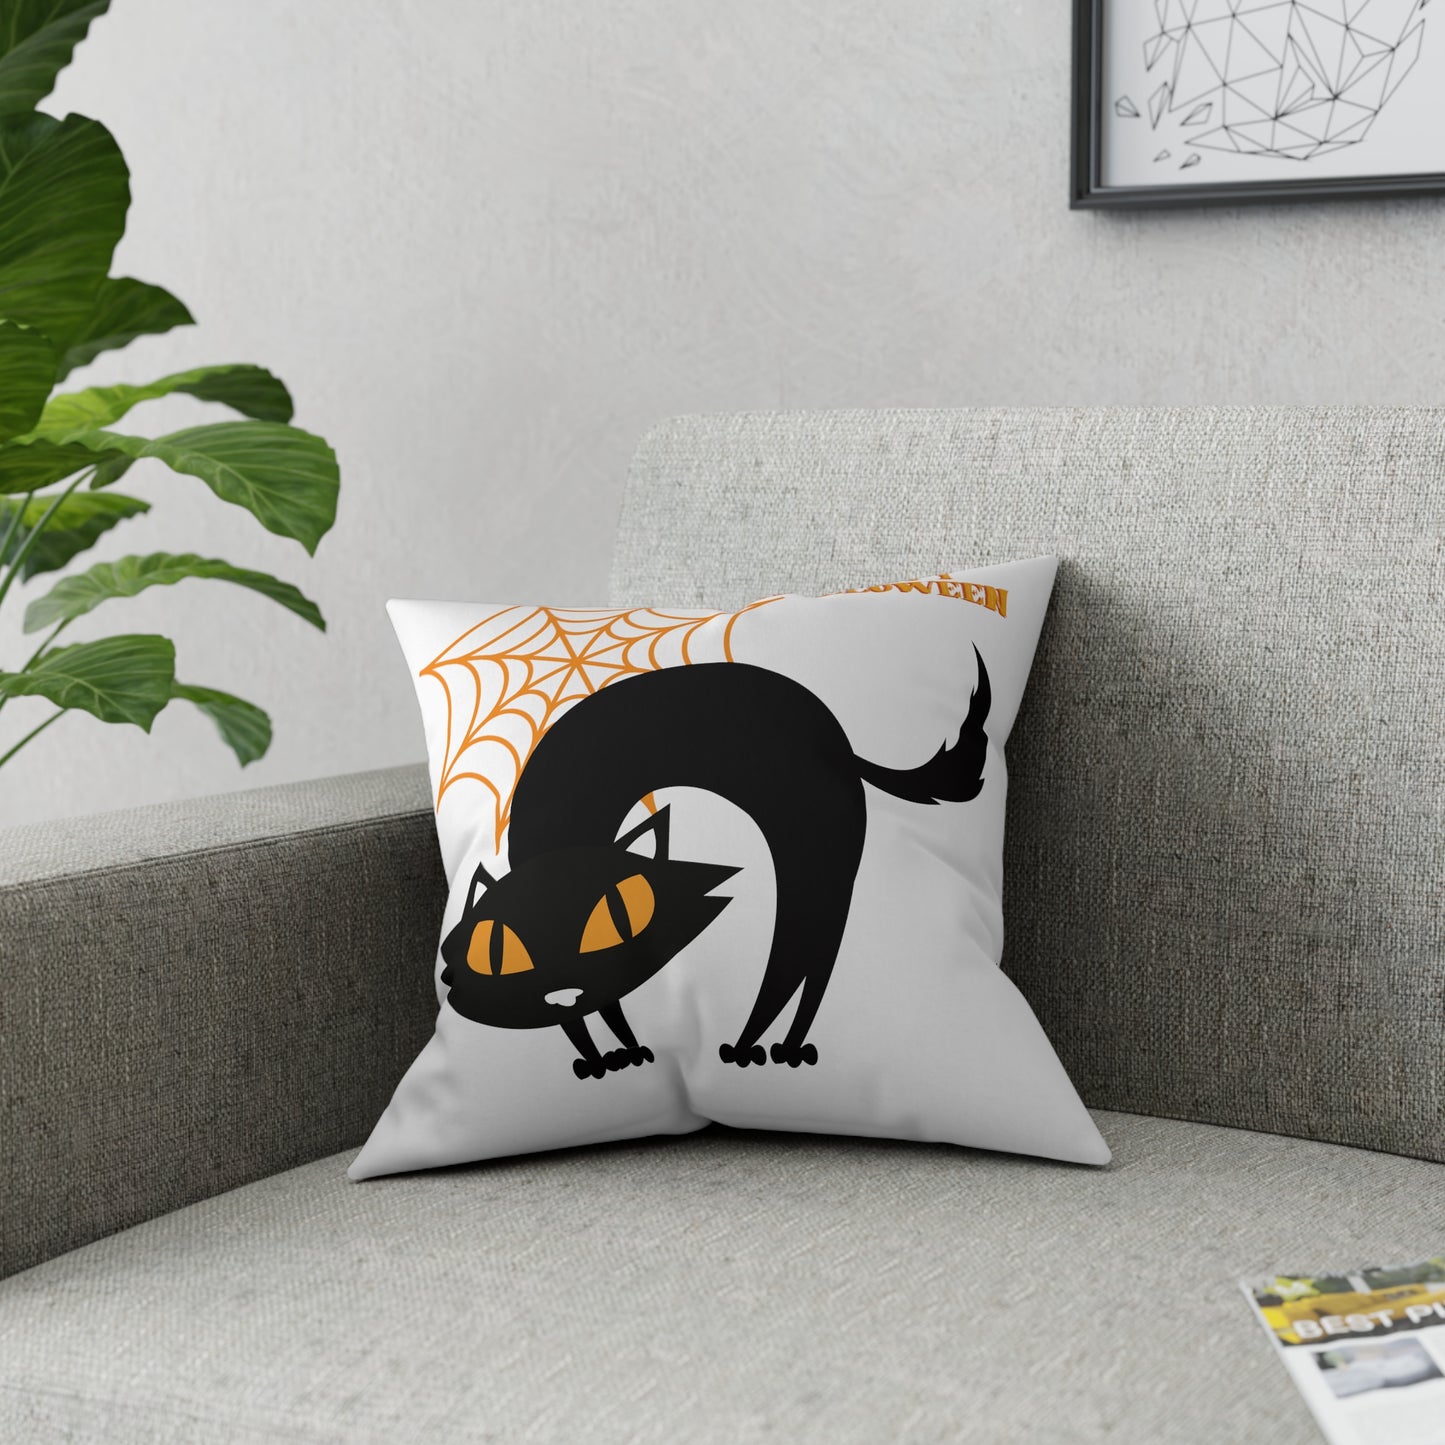 Happy Halloween Black Cat Pillow, Spider Web pillow, Couch Pillow, Fall Pillow, Cat Lover Gift - Design Club Home